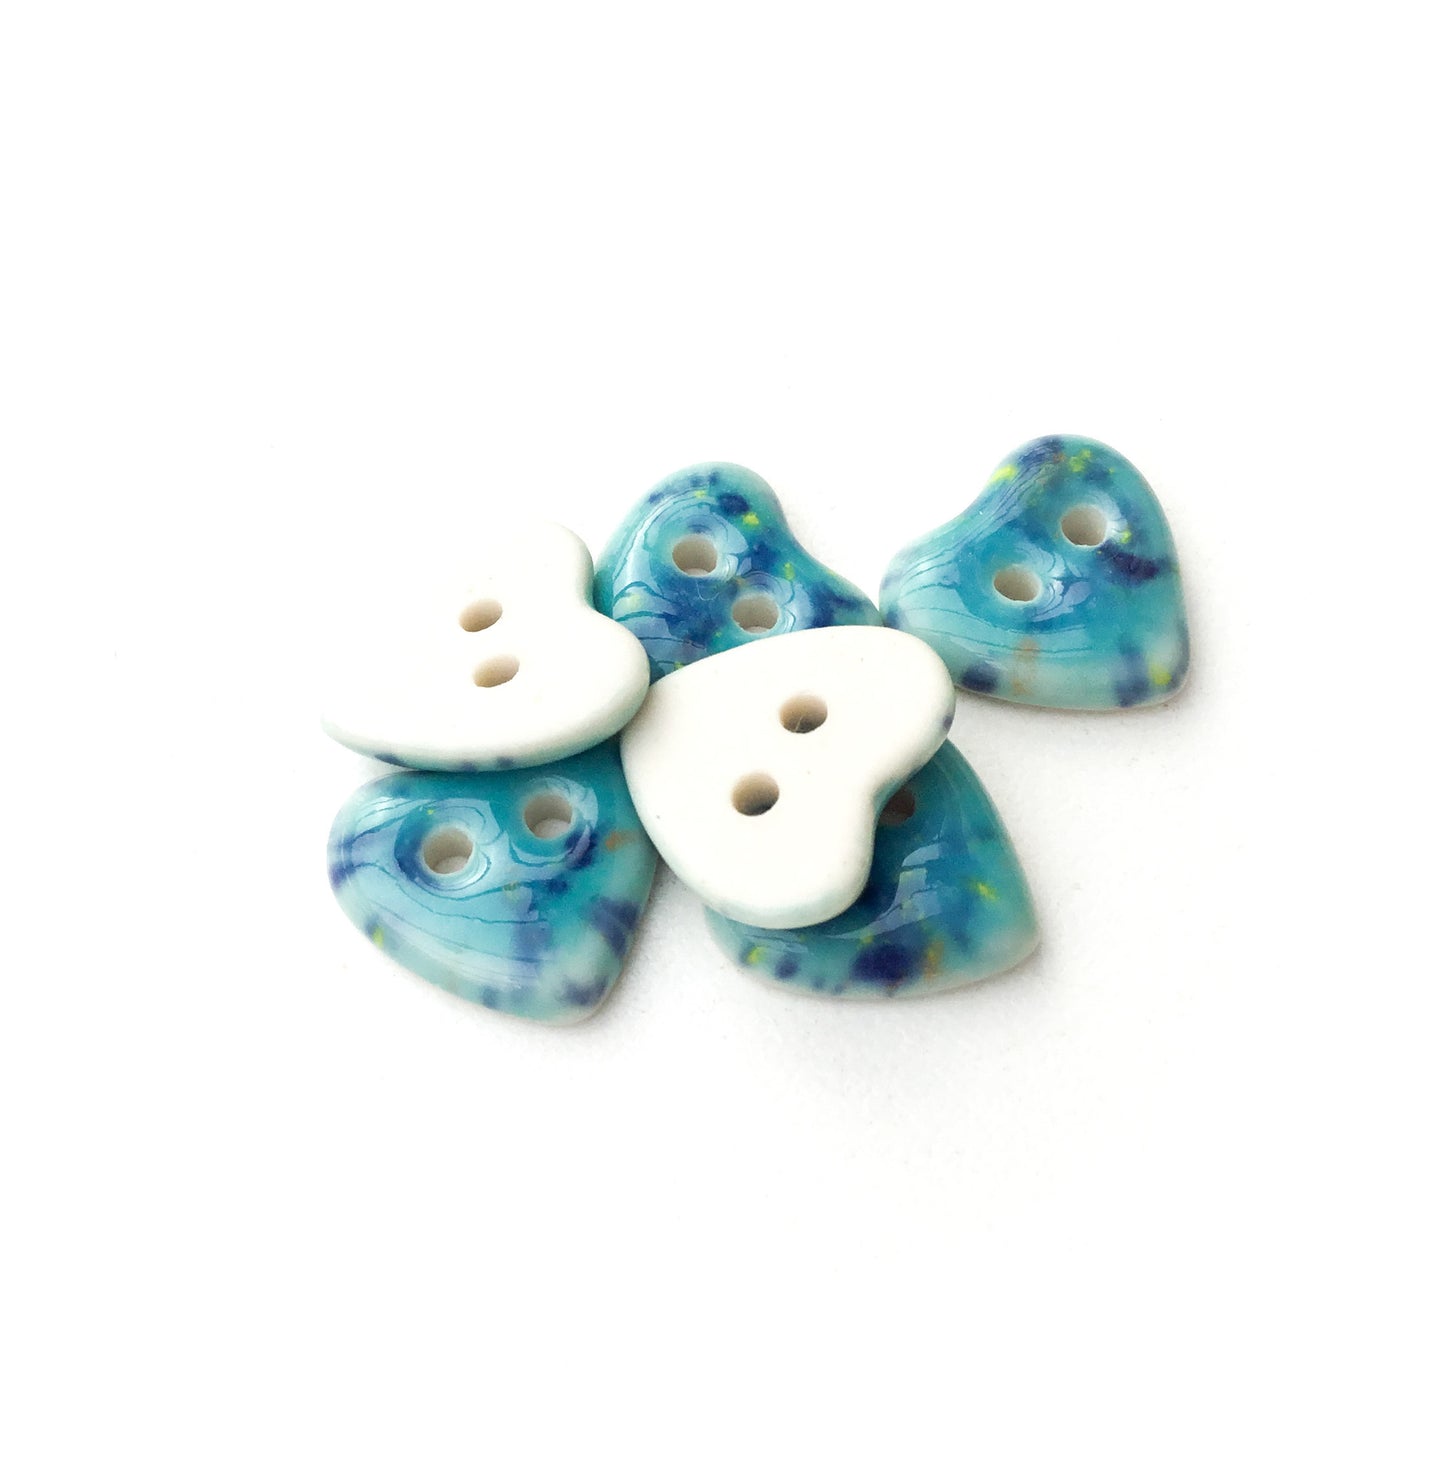 Speckled Turquoise Porcelain Heart Buttons - Ceramic Heart Buttons - 9/16" - 6 pack